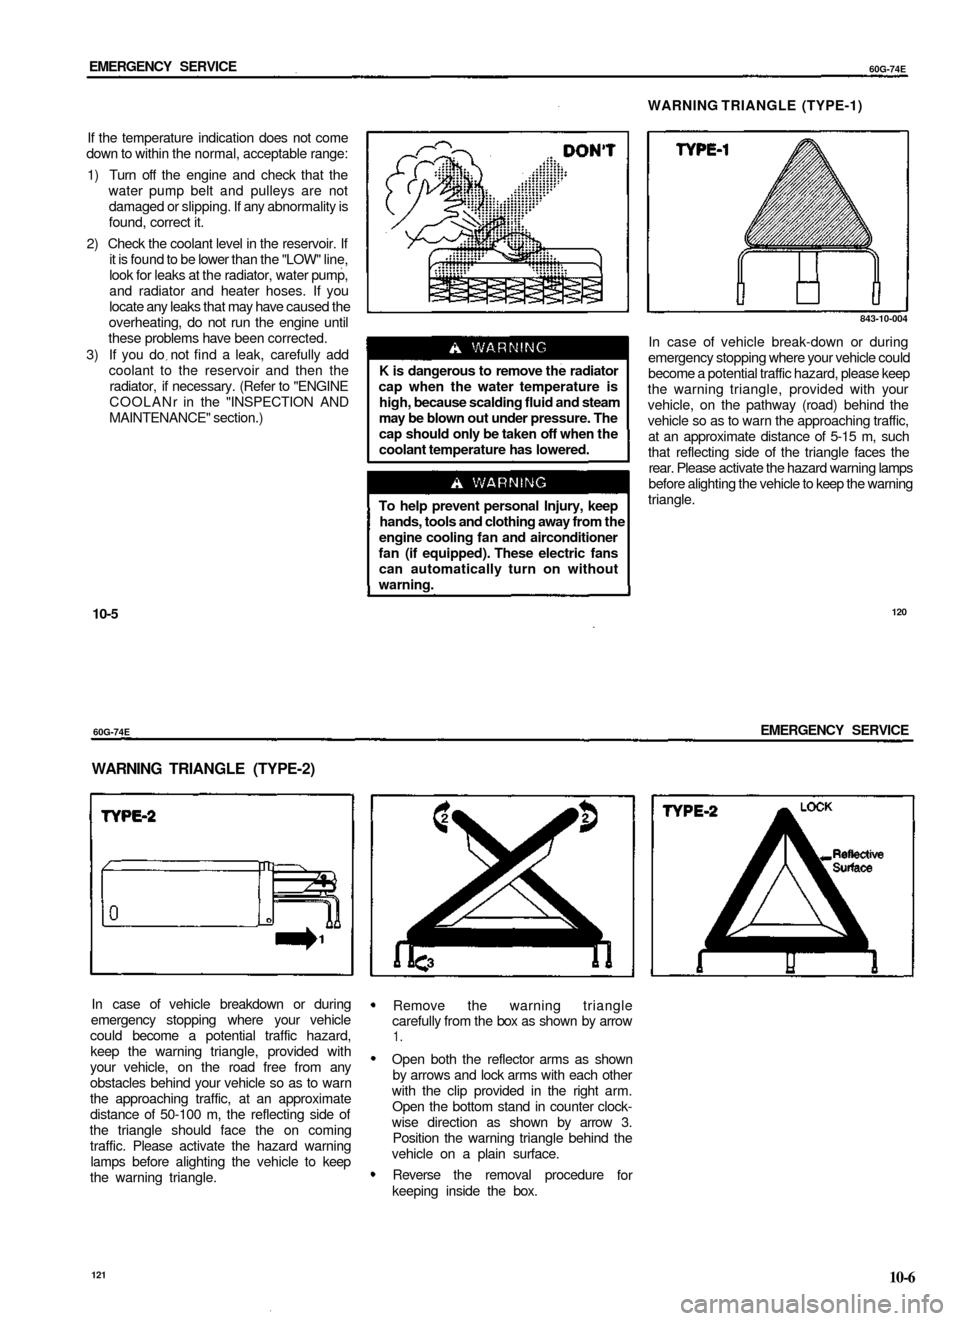 SUZUKI BALENO 1999 1.G Workshop Manual 
EMERGENCY SERVICE

60G-74E

WARNING TRIANGLE (TYPE-1)

If the temperature indication does not come

down to within the normal, acceptable range:

1) Turn off the engine and check that the

water pump